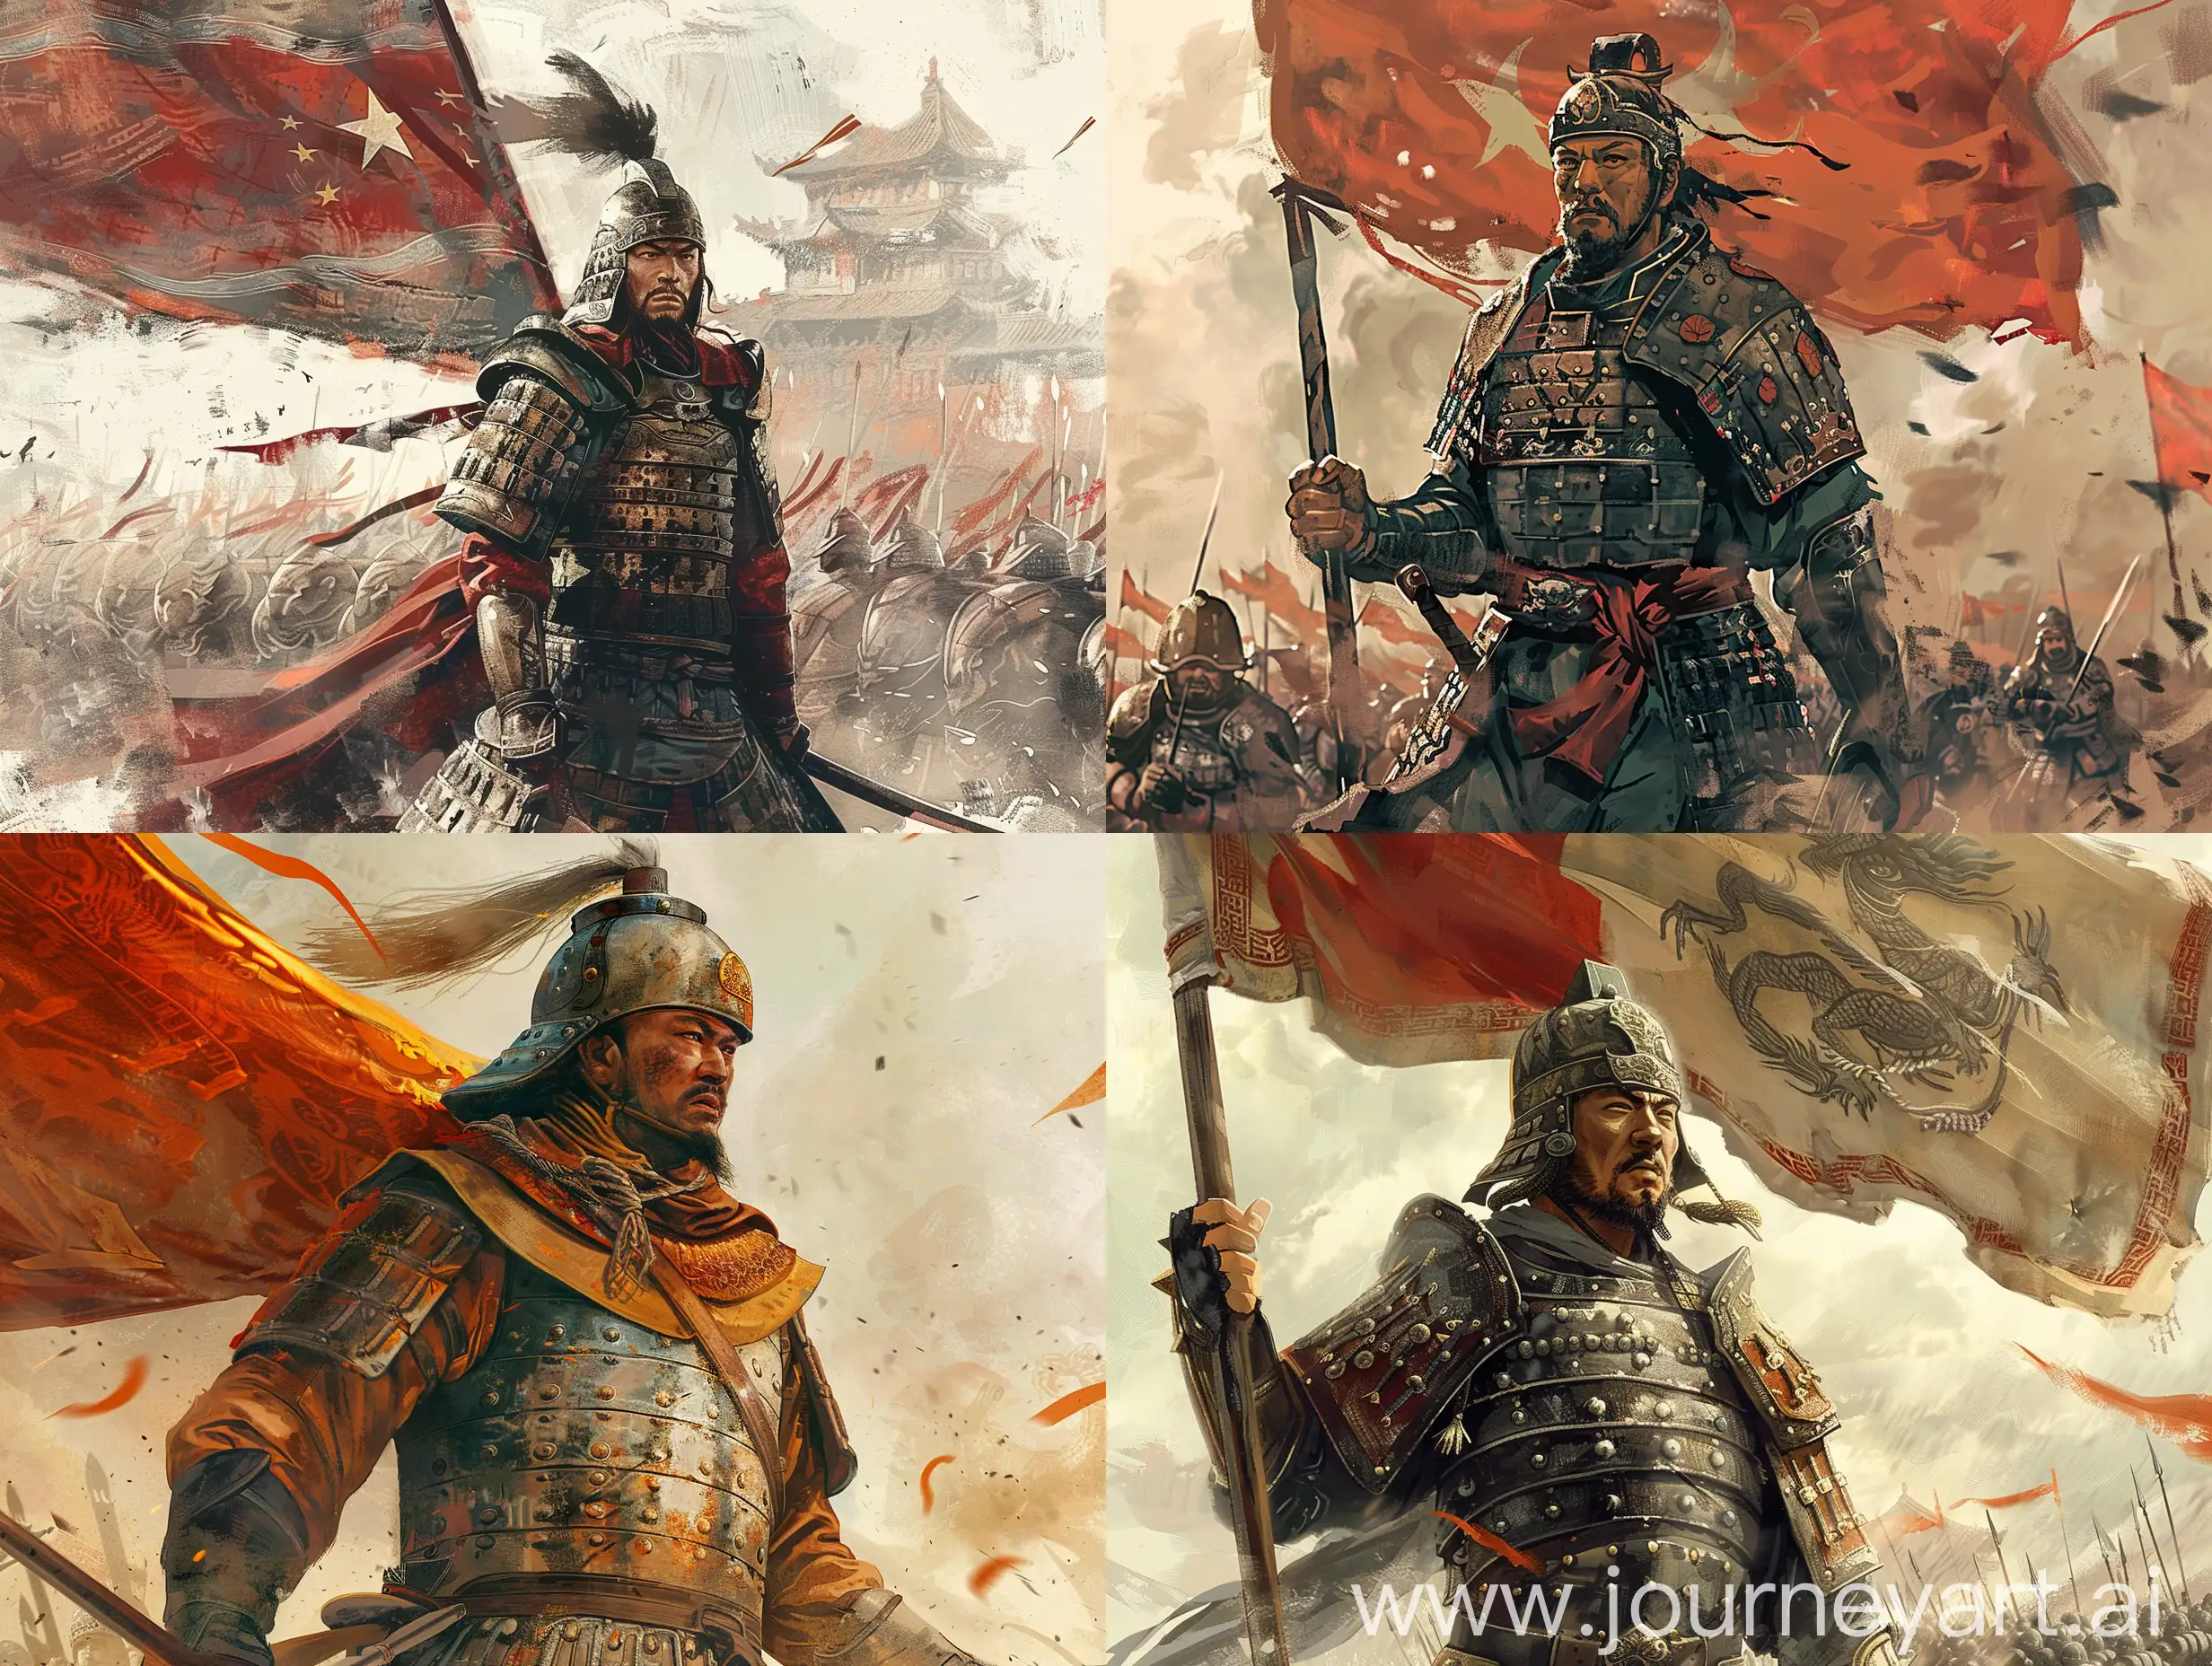 Ancient-Chinese-Warrior-Leading-Army-with-Military-Flag-in-Ink-Painting-Style